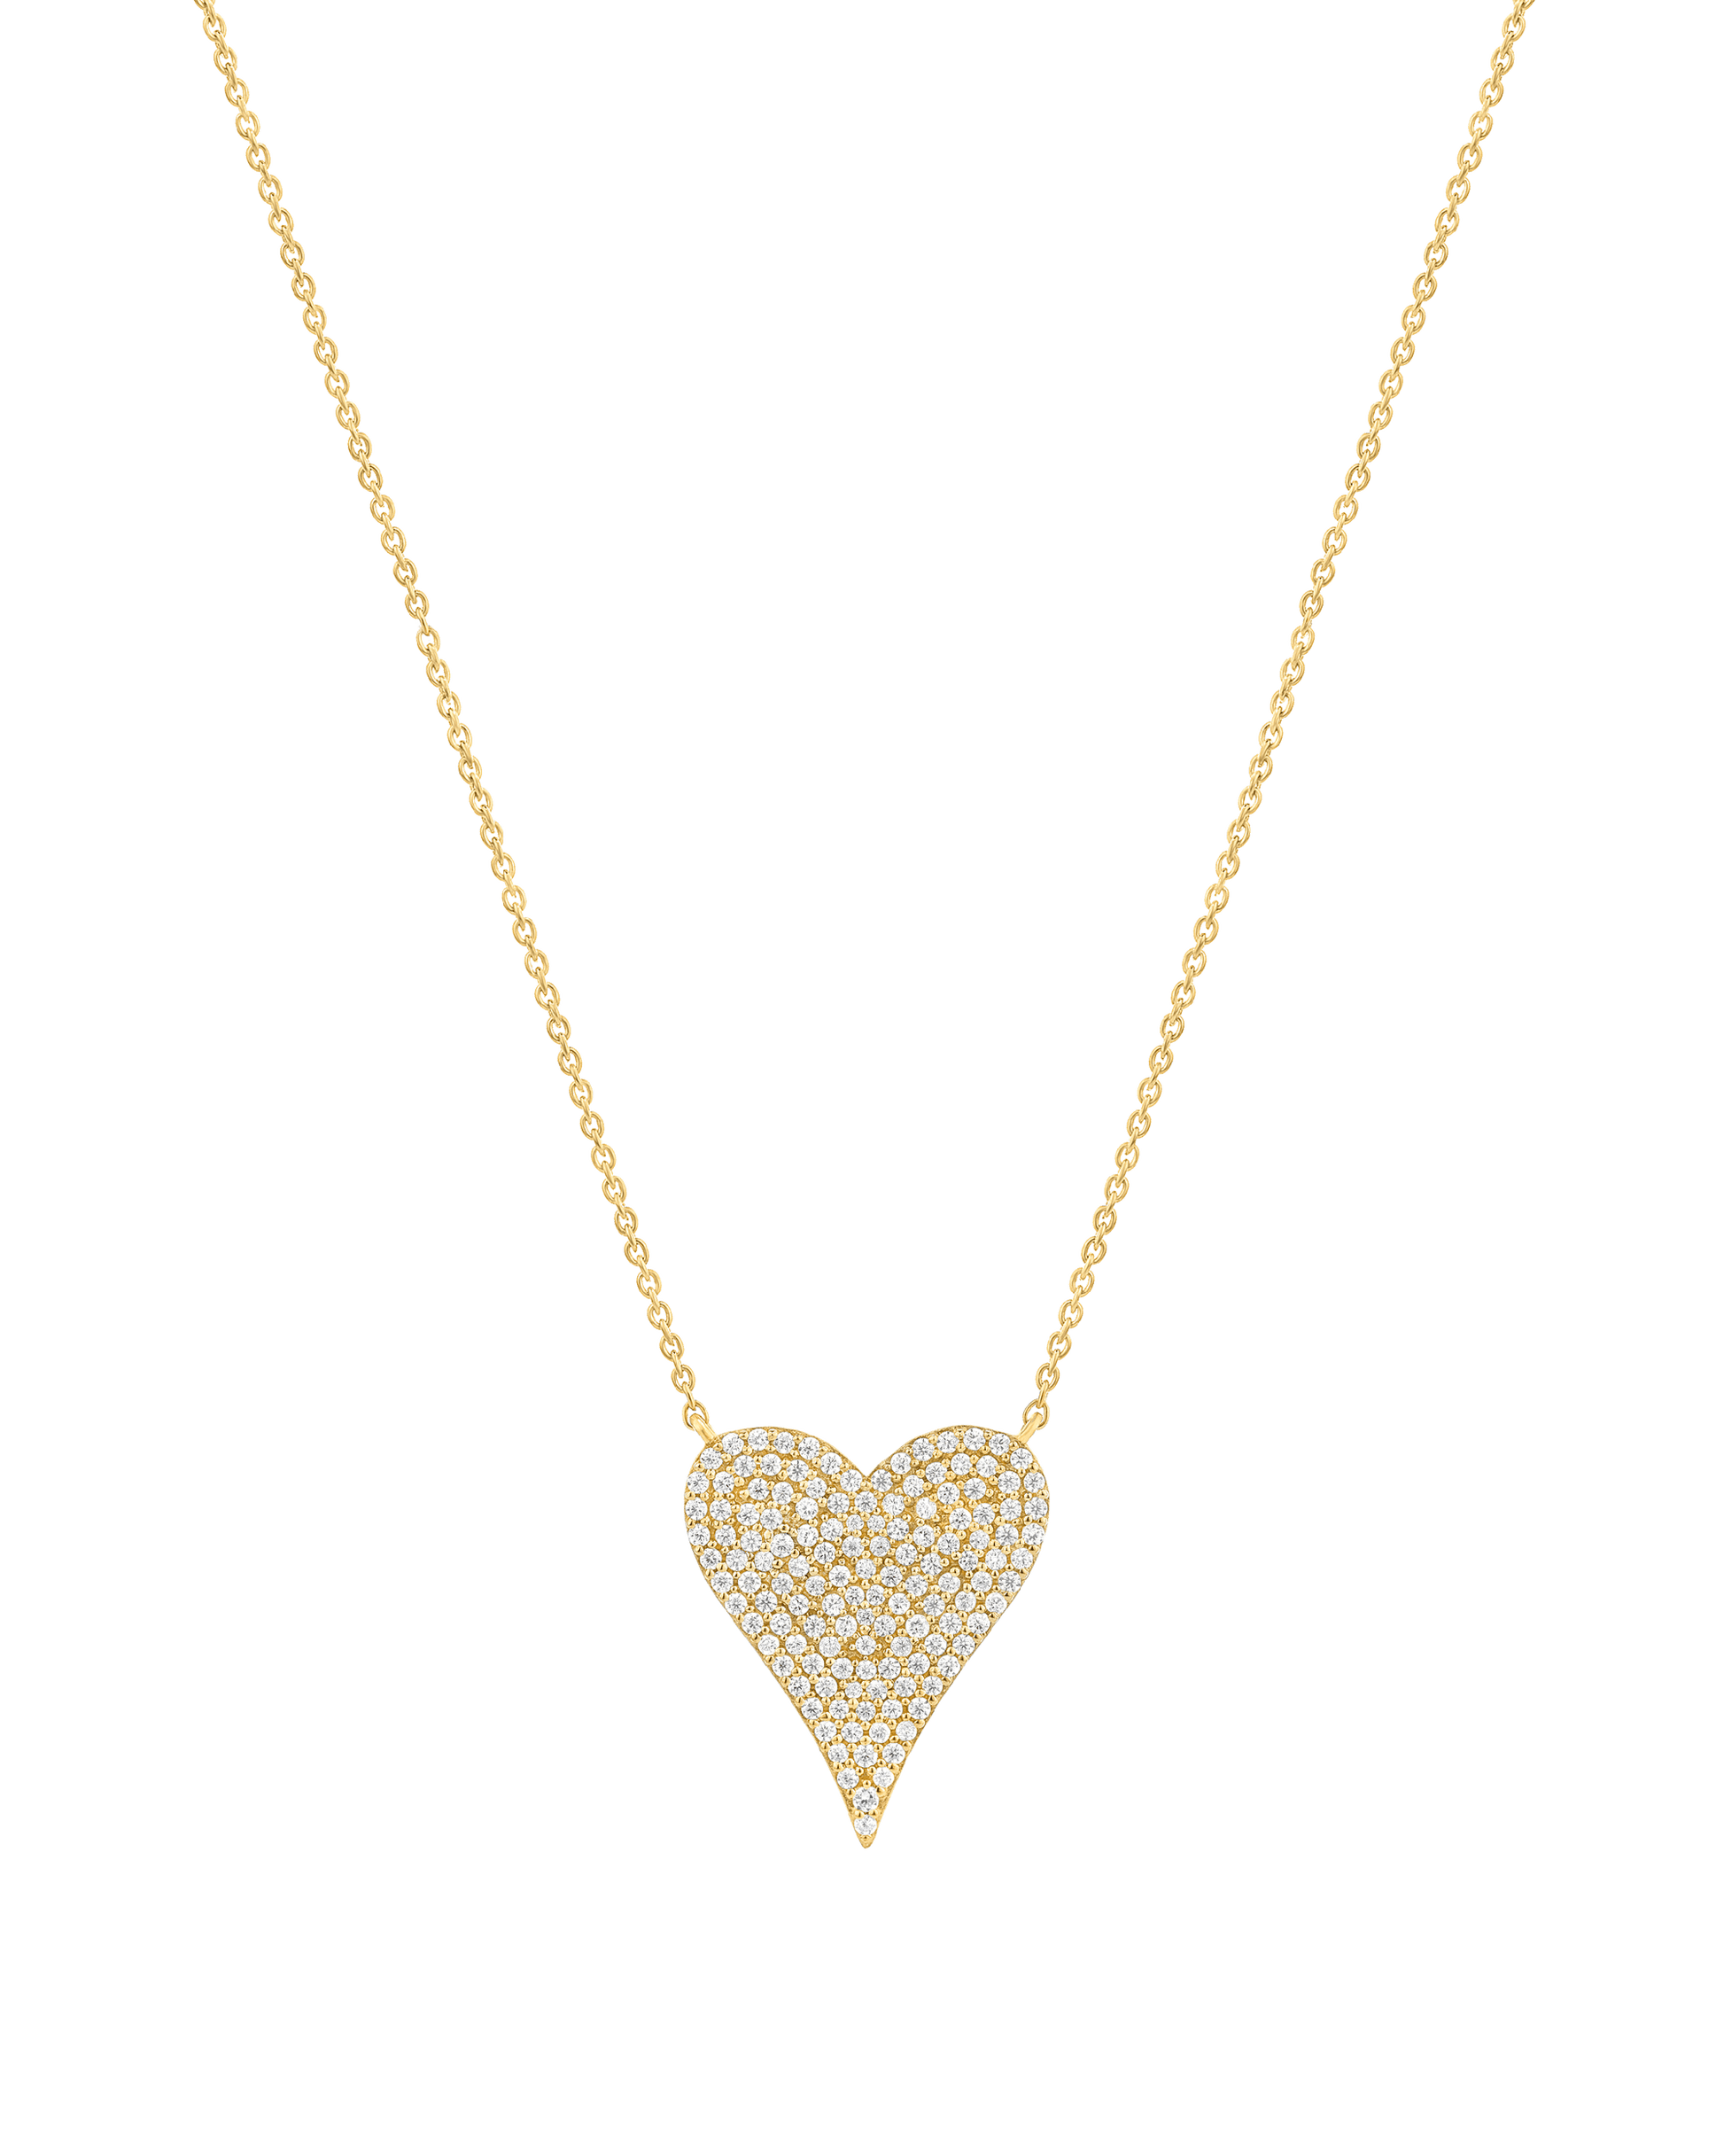 Large Diamond Paved Heart Necklace - 14K White Gold Necklaces magal-dev 